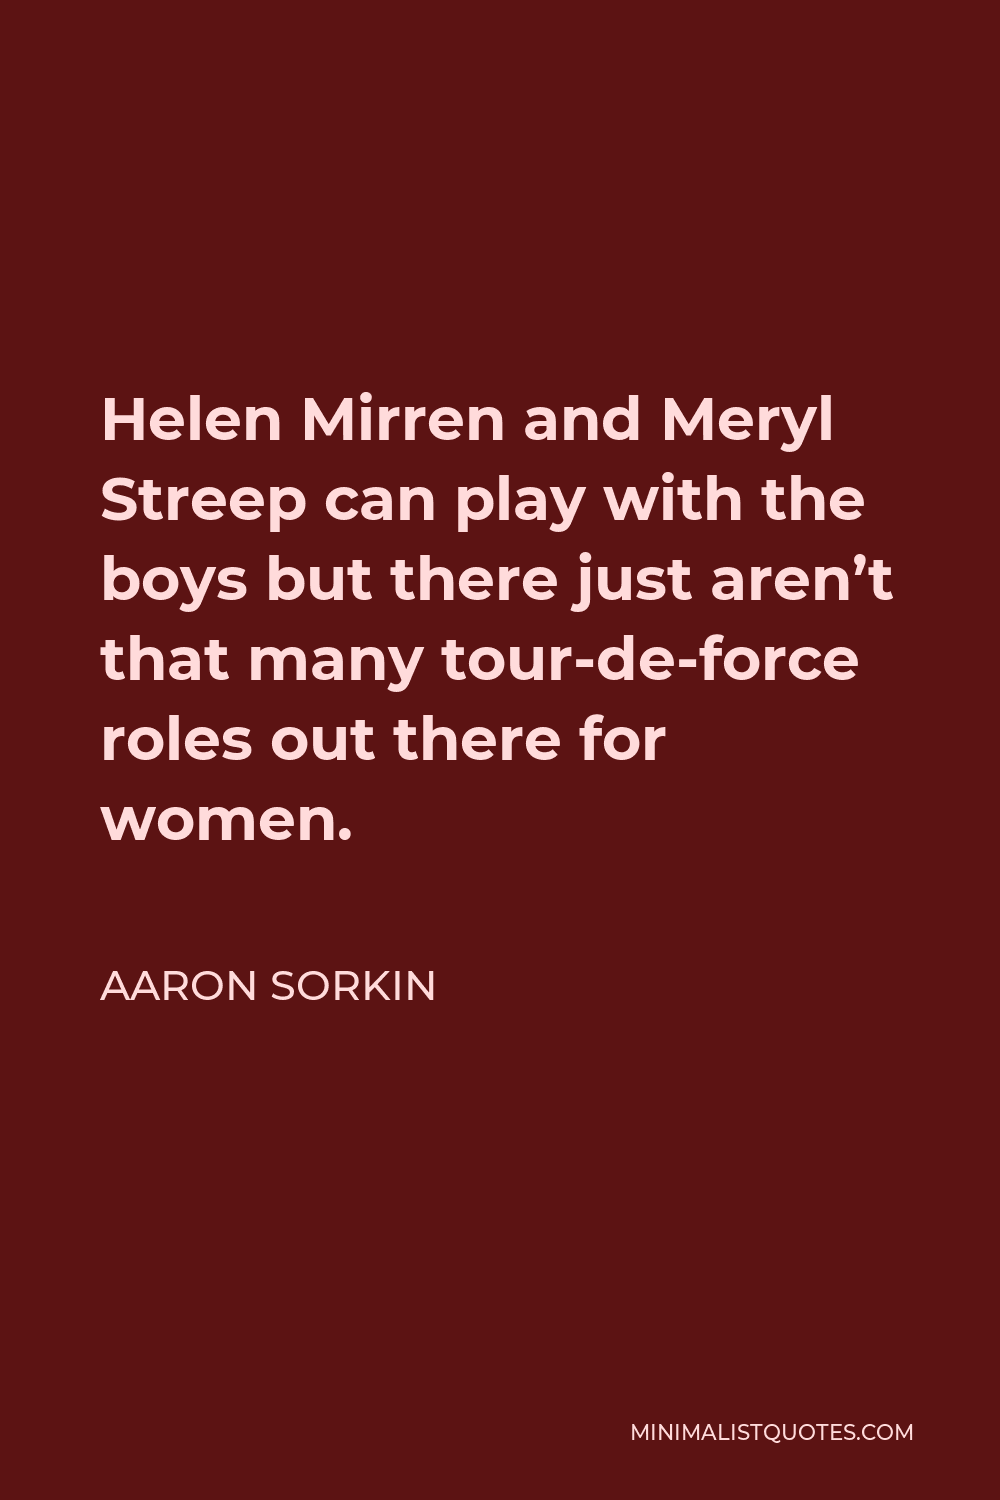 Aaron Sorkin Quote - Helen Mirren and Meryl Streep can play with the boys but there just aren’t that many tour-de-force roles out there for women.